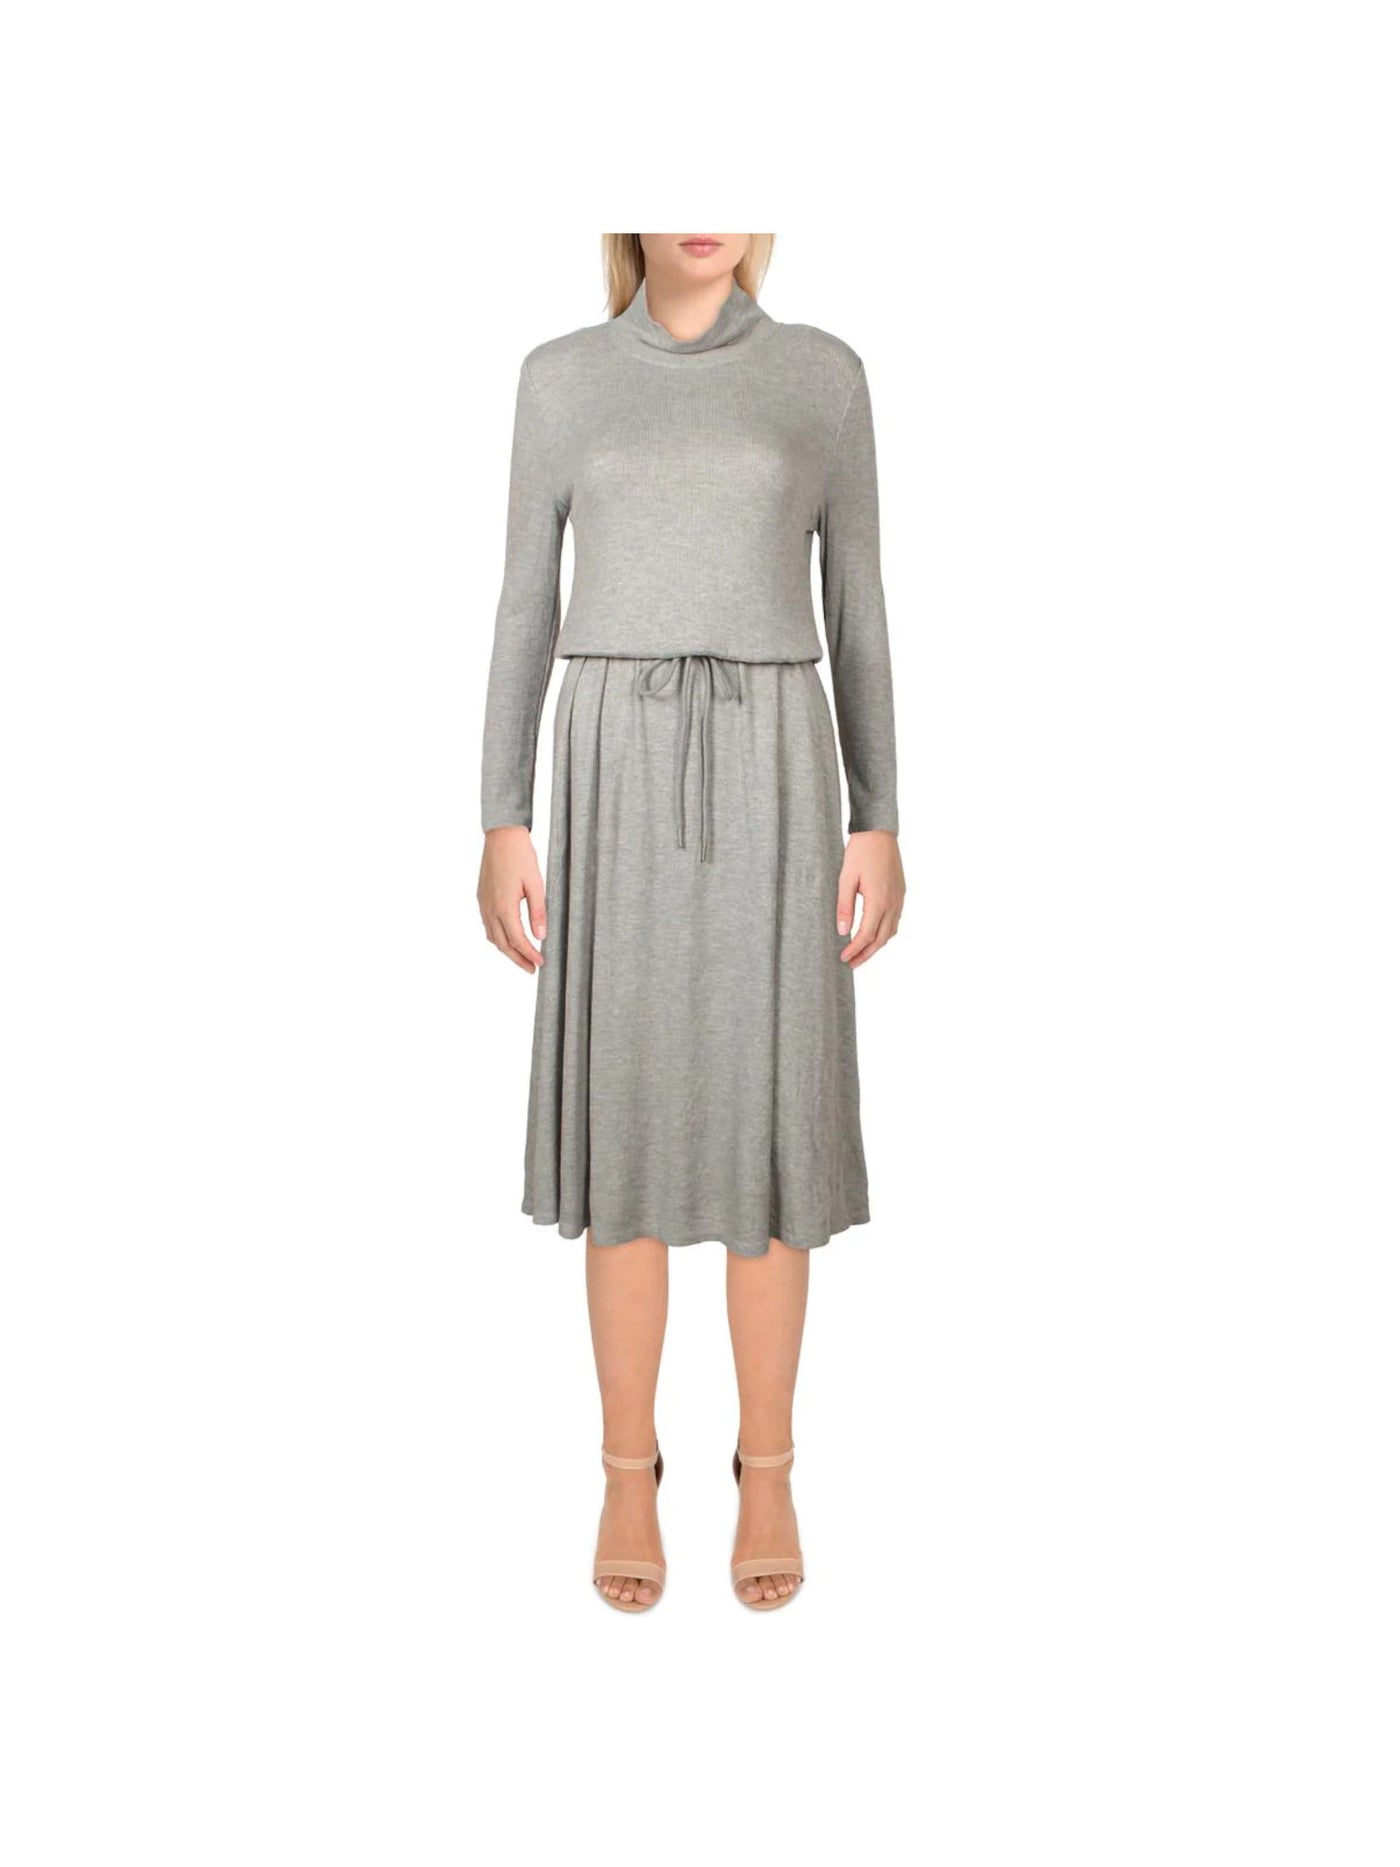 CALVIN KLEIN Womens Gray Stretch Ribbed Pocketed Drawstring Waist Heather Long Sleeve Mock Neck Below The Knee Shift Dress 4